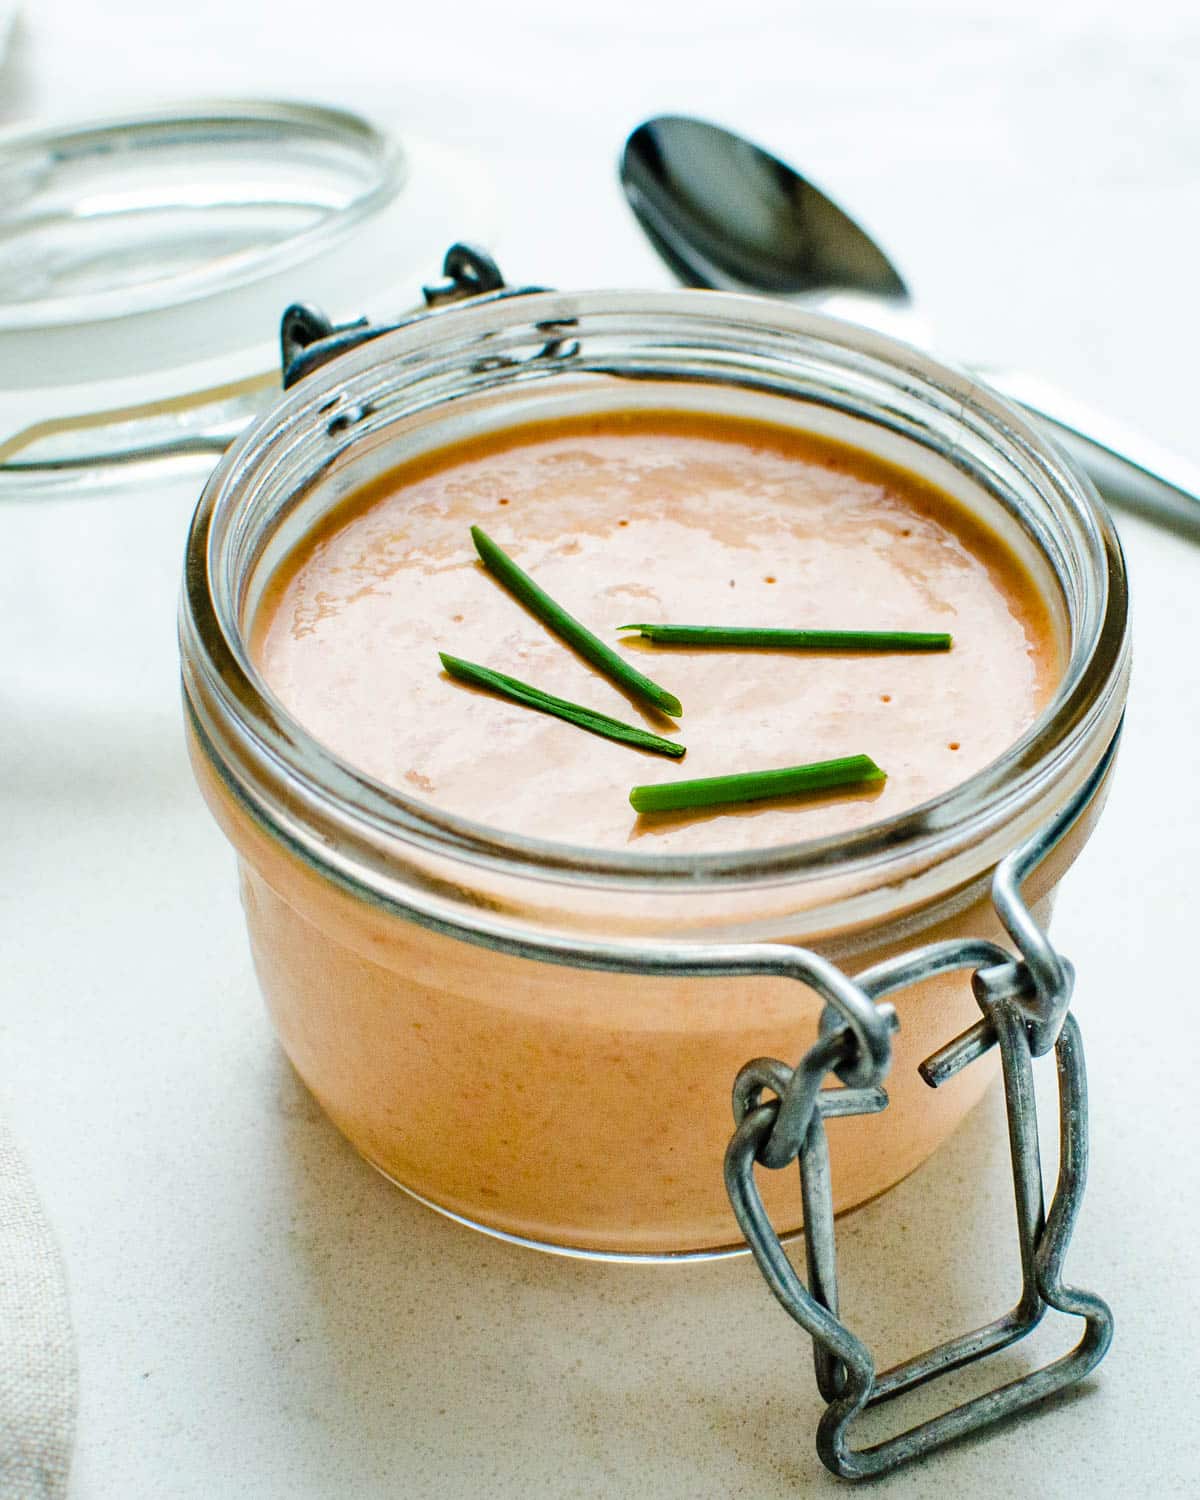 Refrigerate the sweet bell pepper aioli to allow it to thicken.